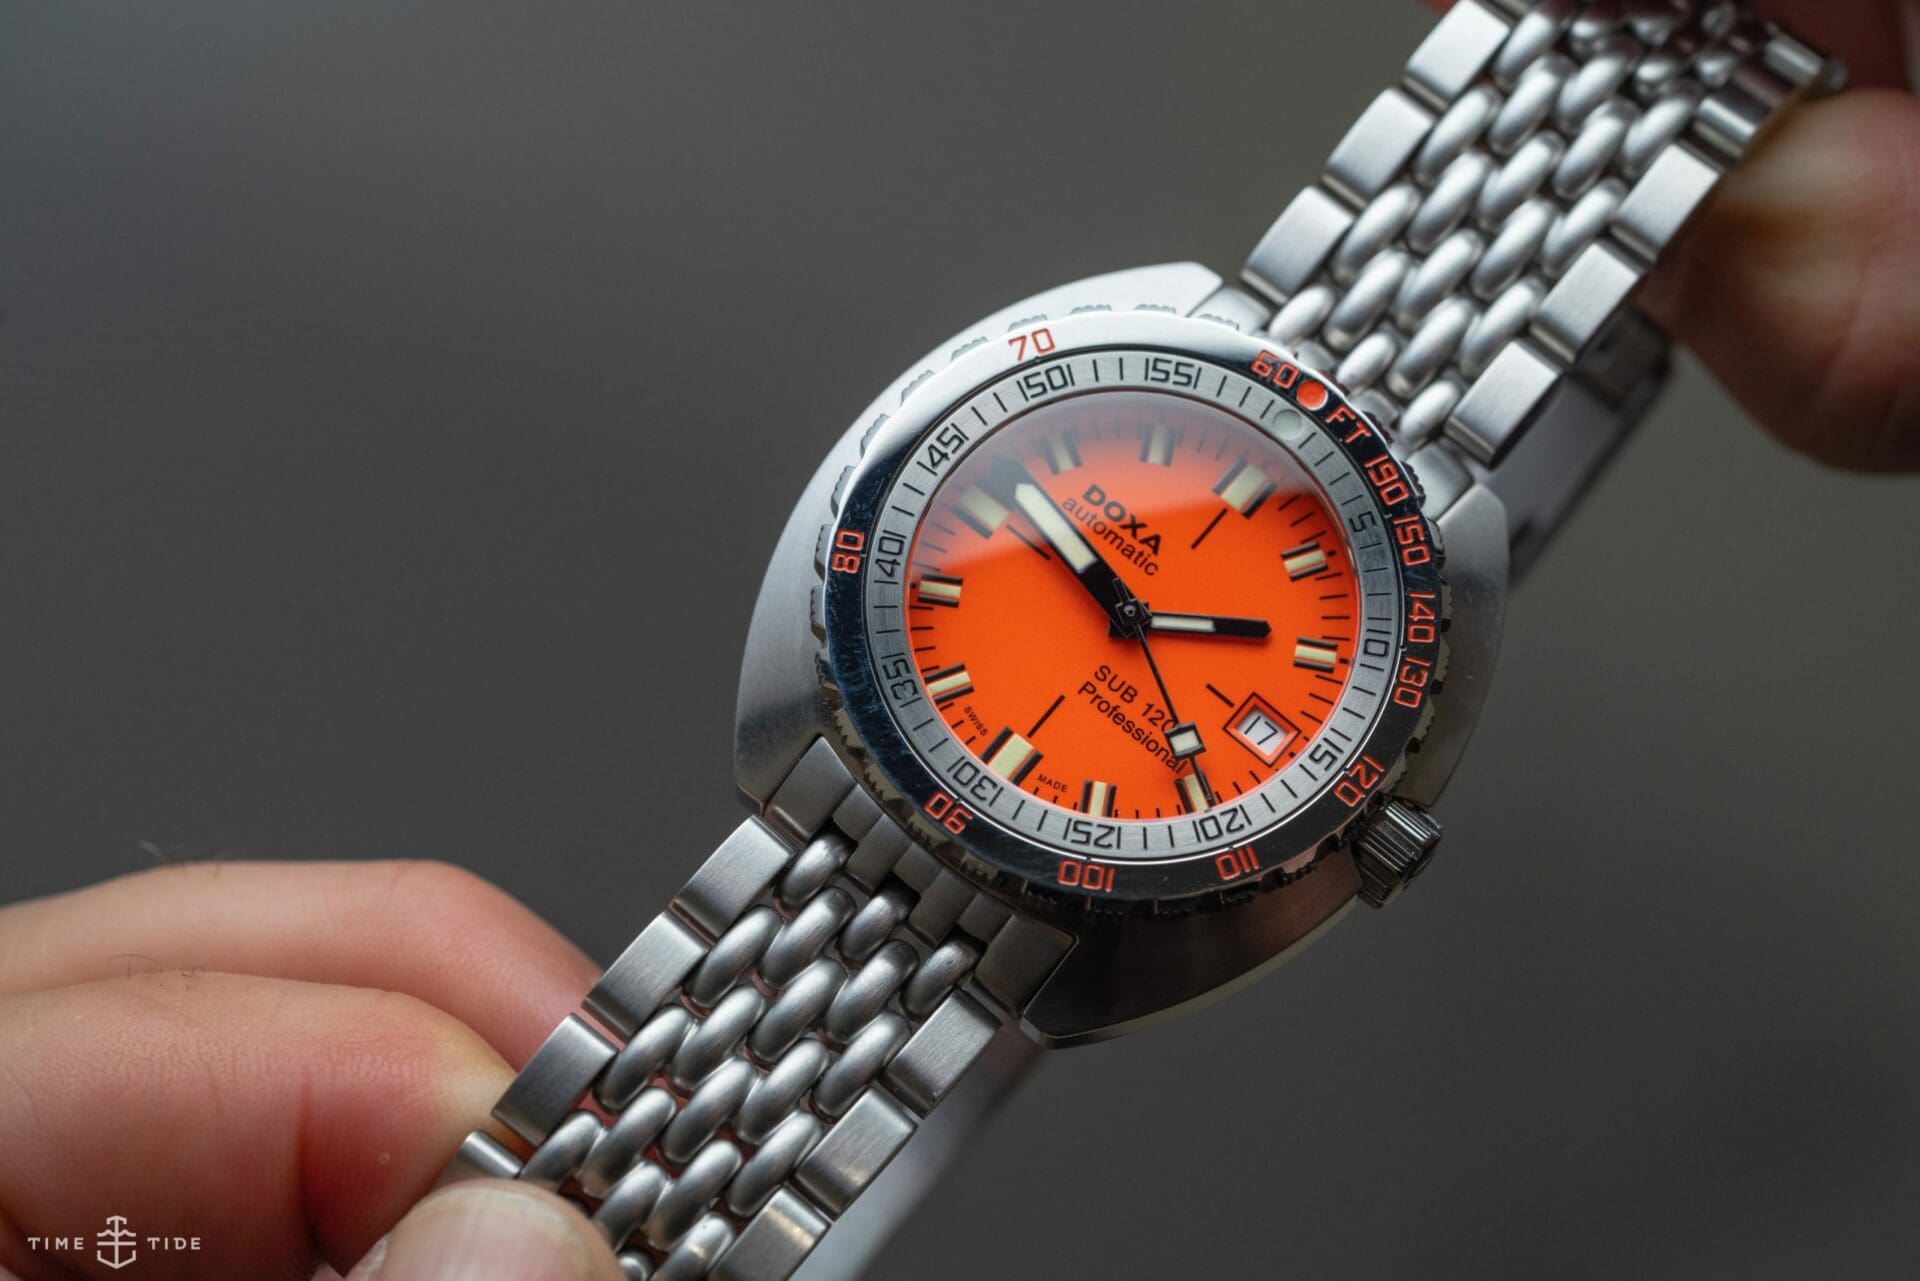 Dive deep with the DOXA Sub 1200T Professional